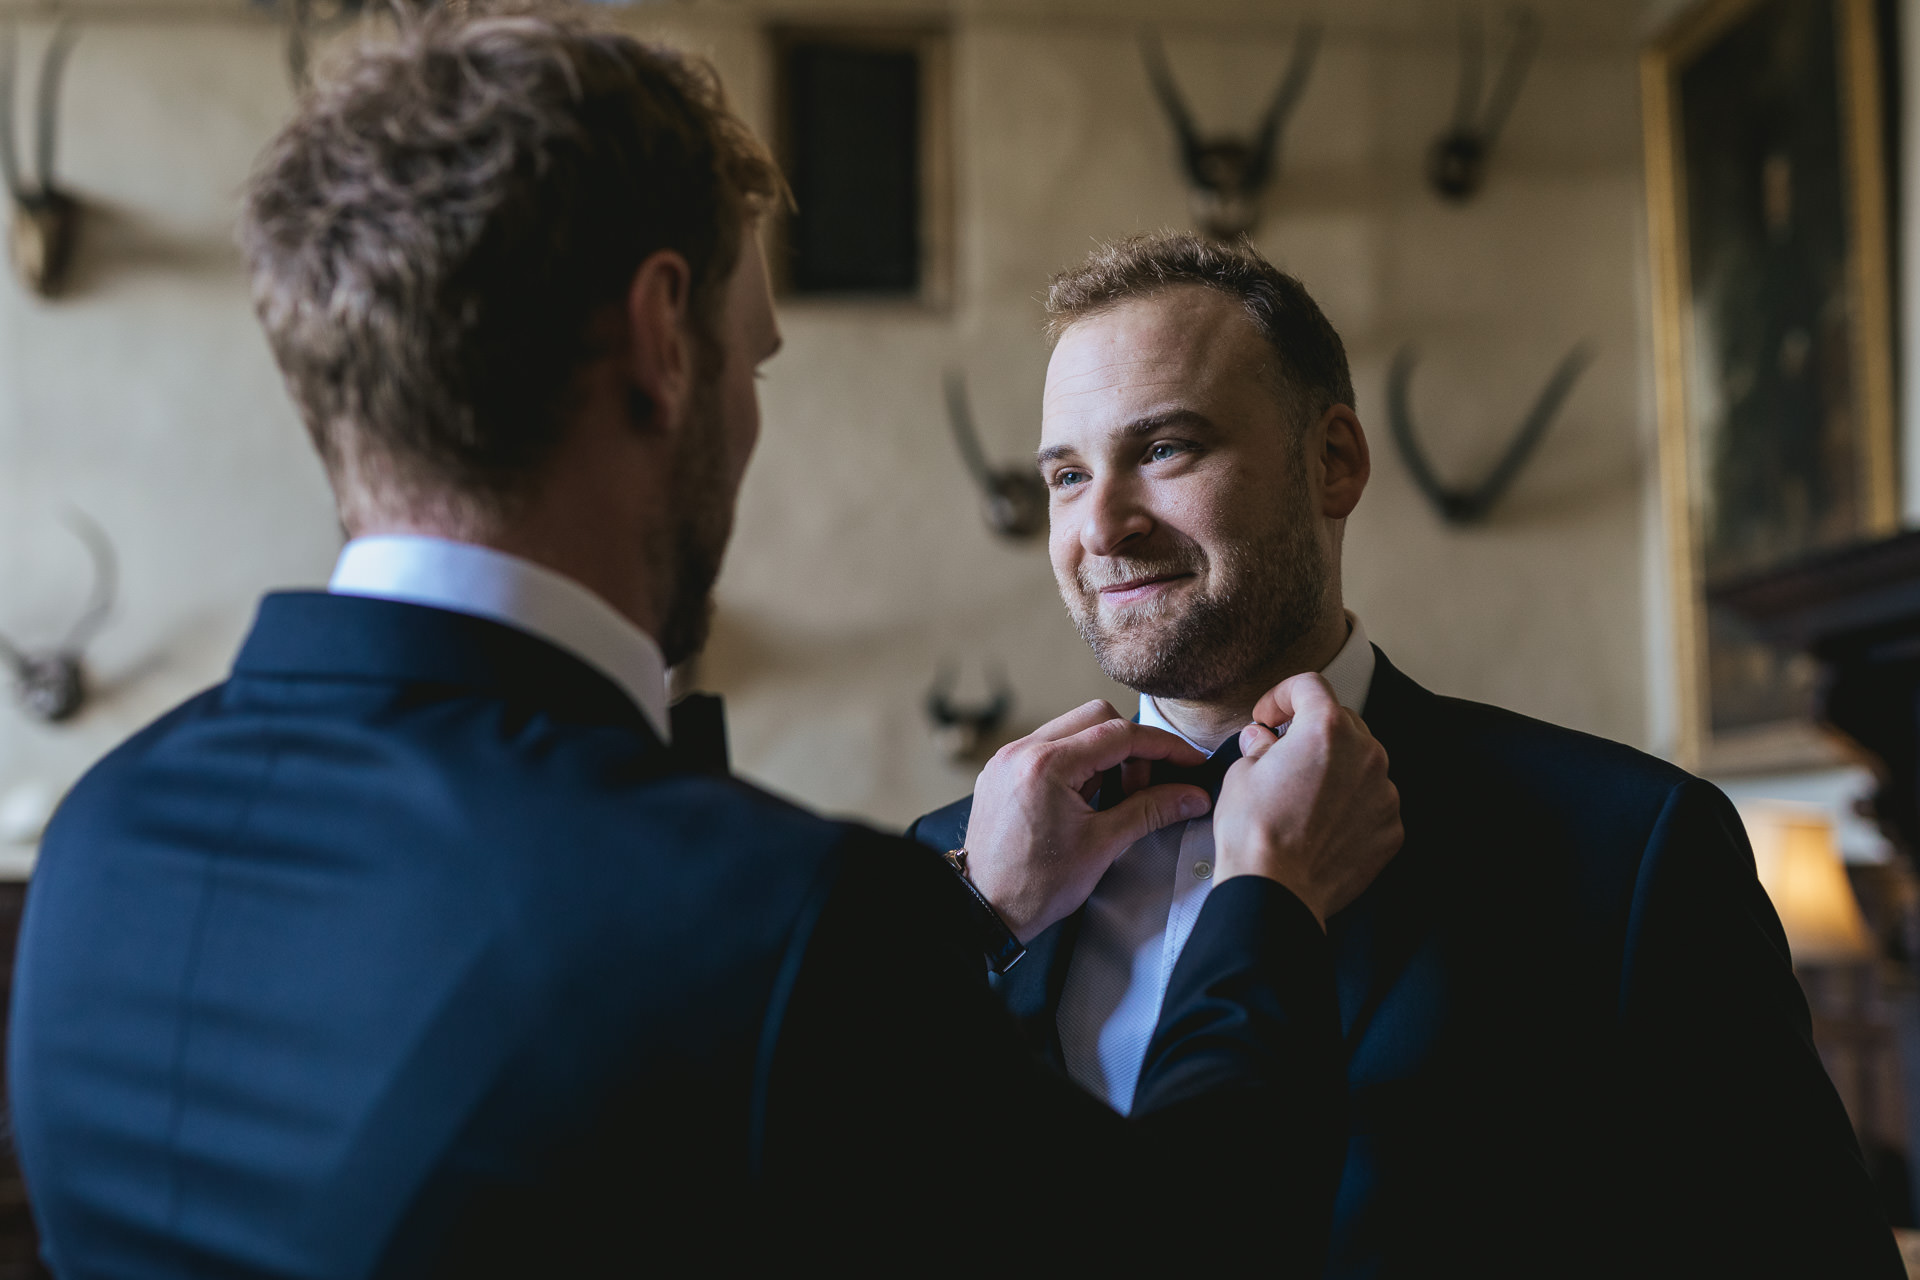 Groom to be having his tie adjusted